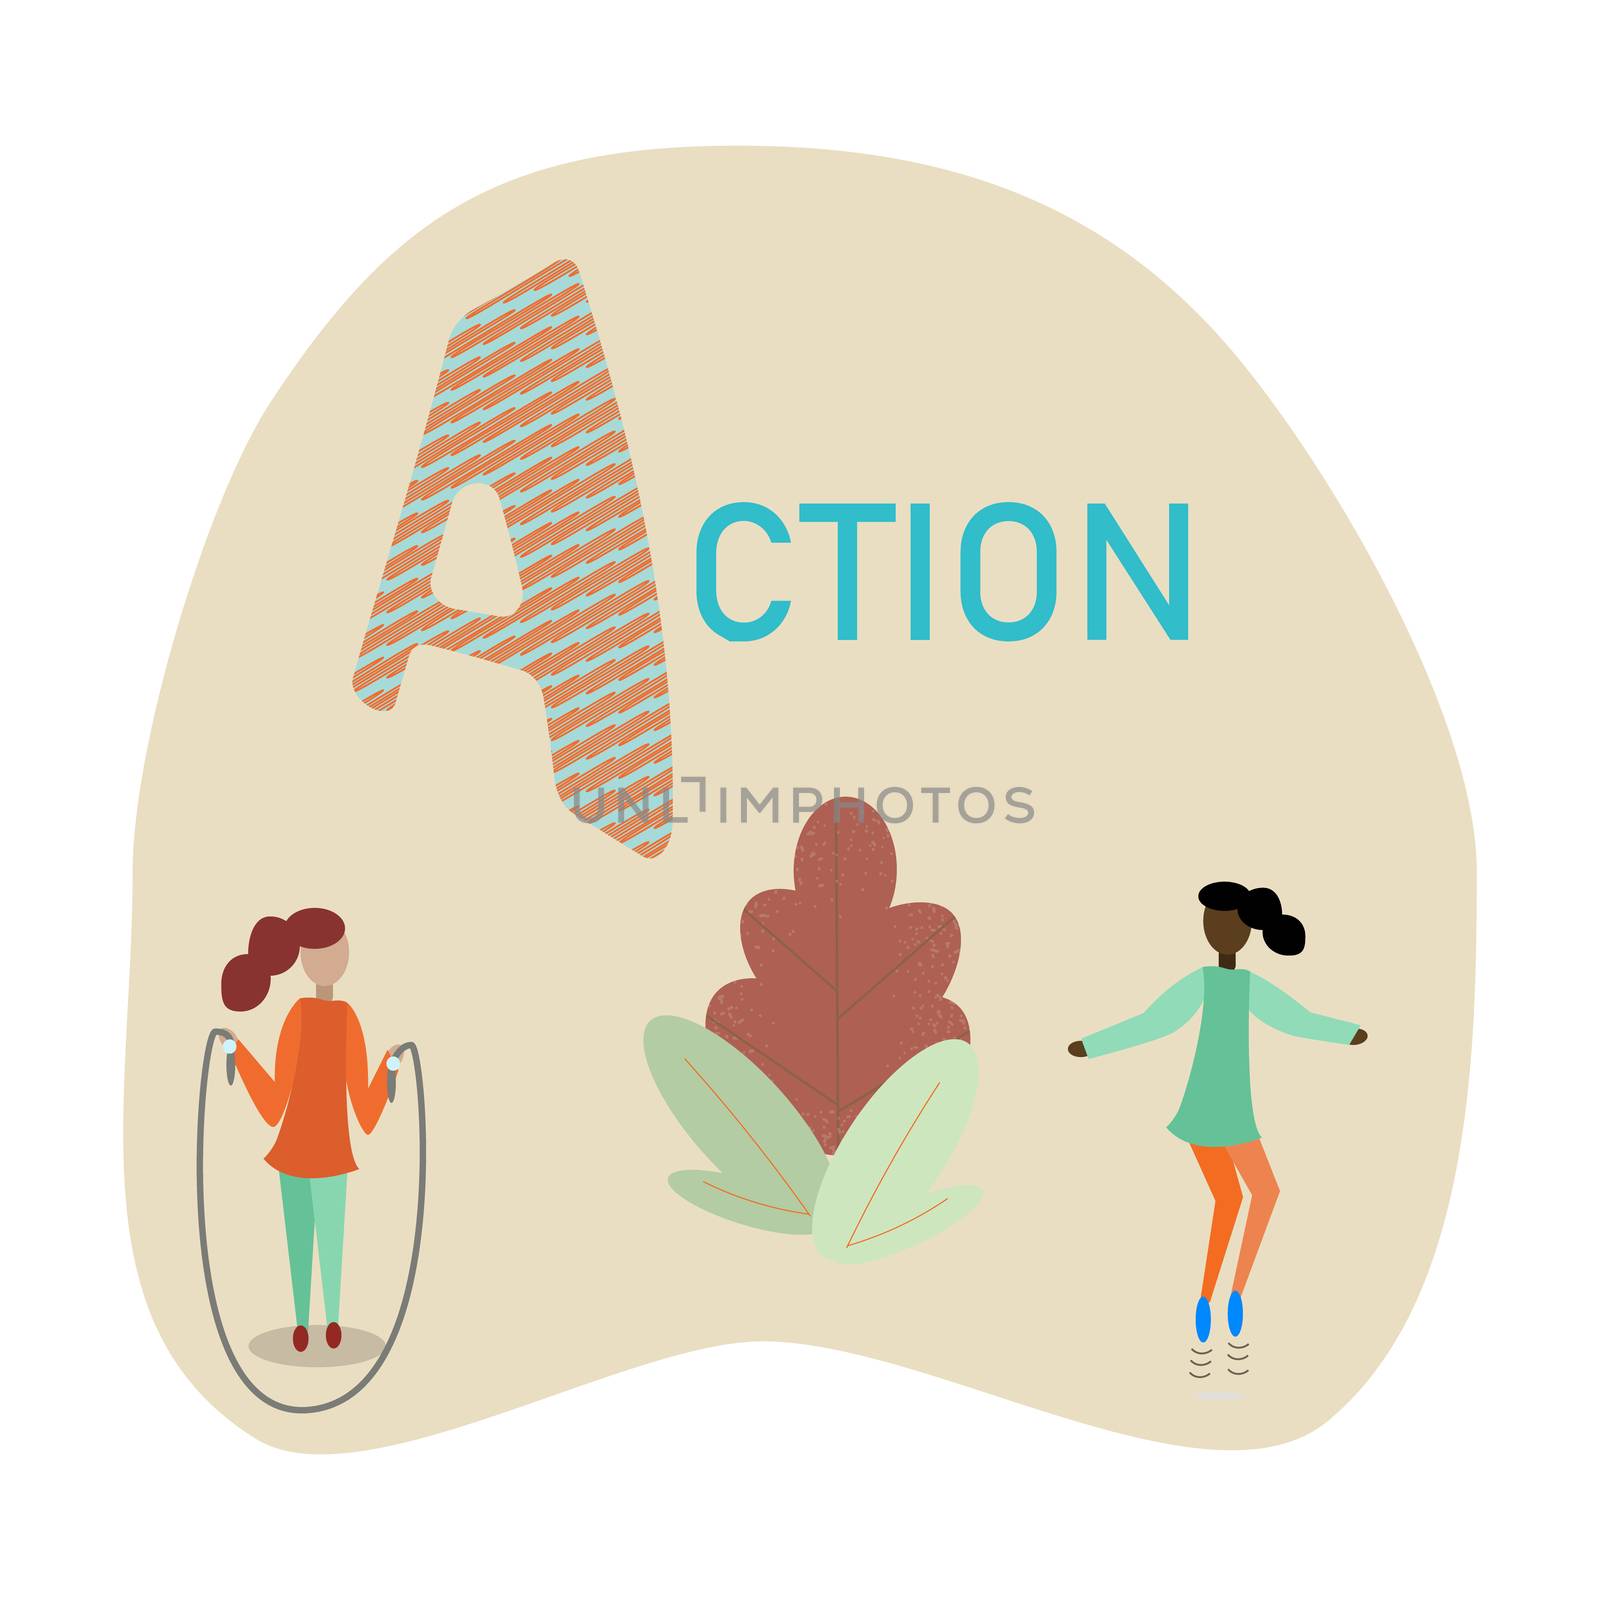 Letter A for action by Nata_Prando